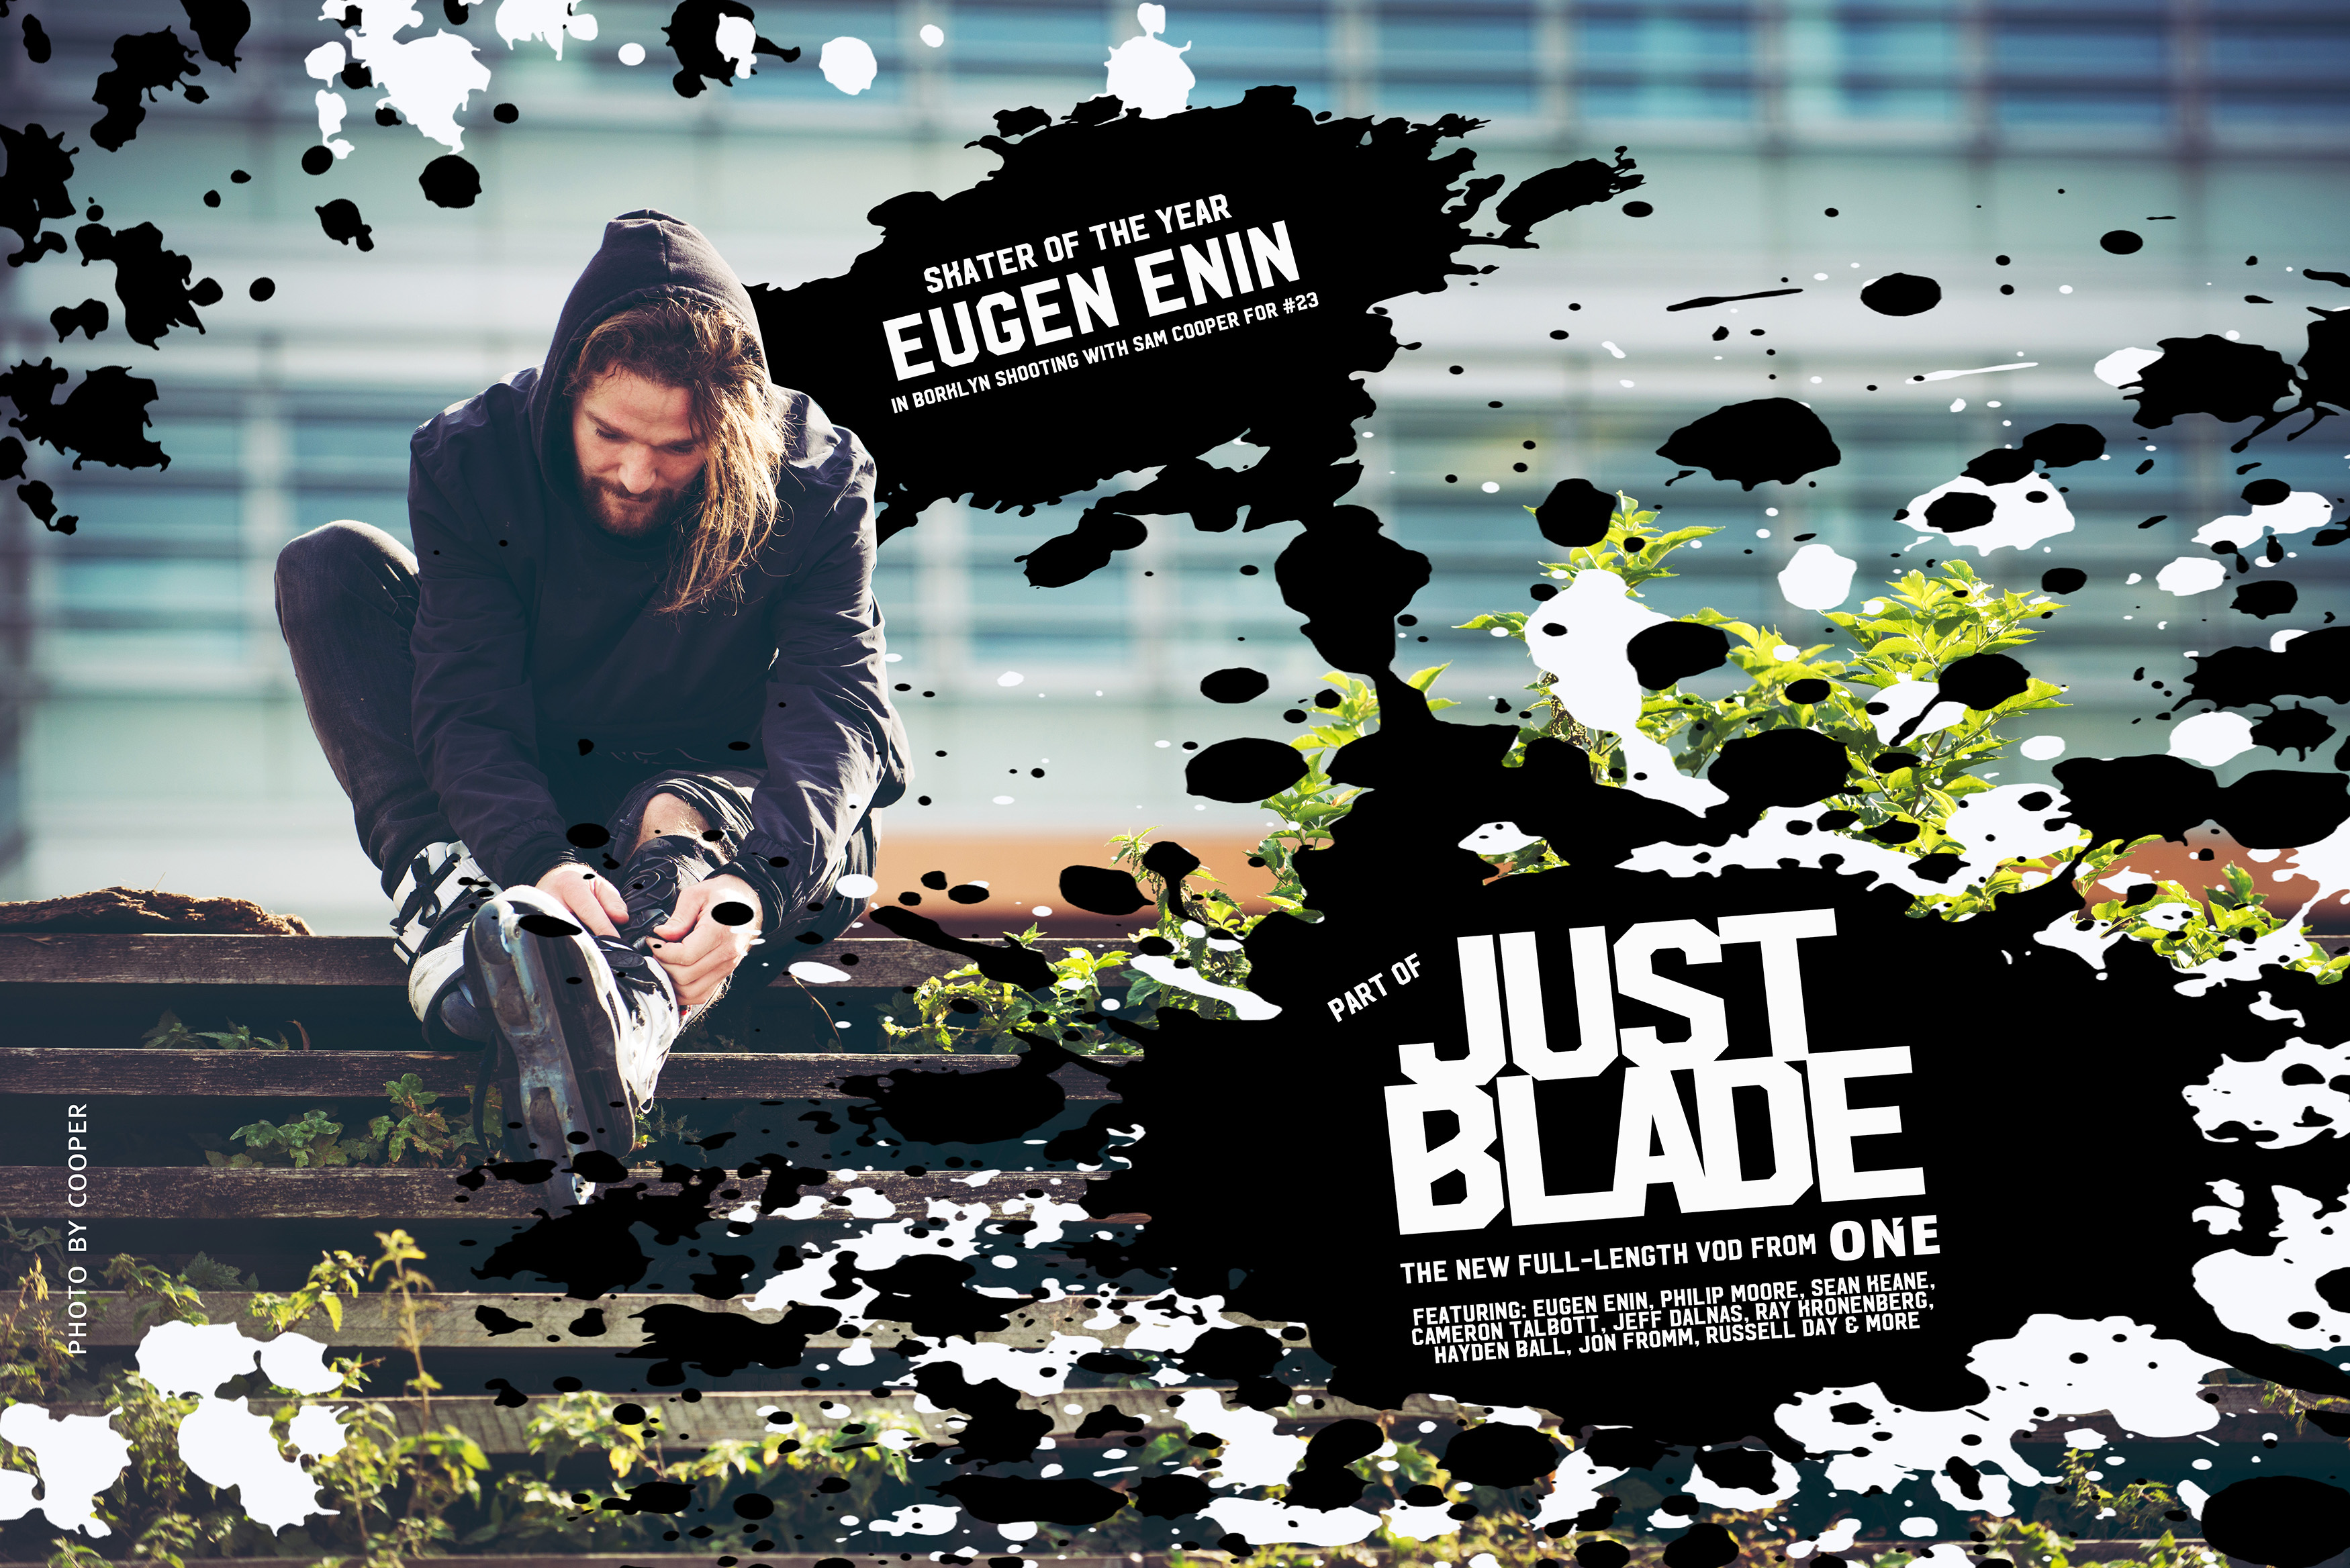 ONE announces new video project “JUST BLADE”